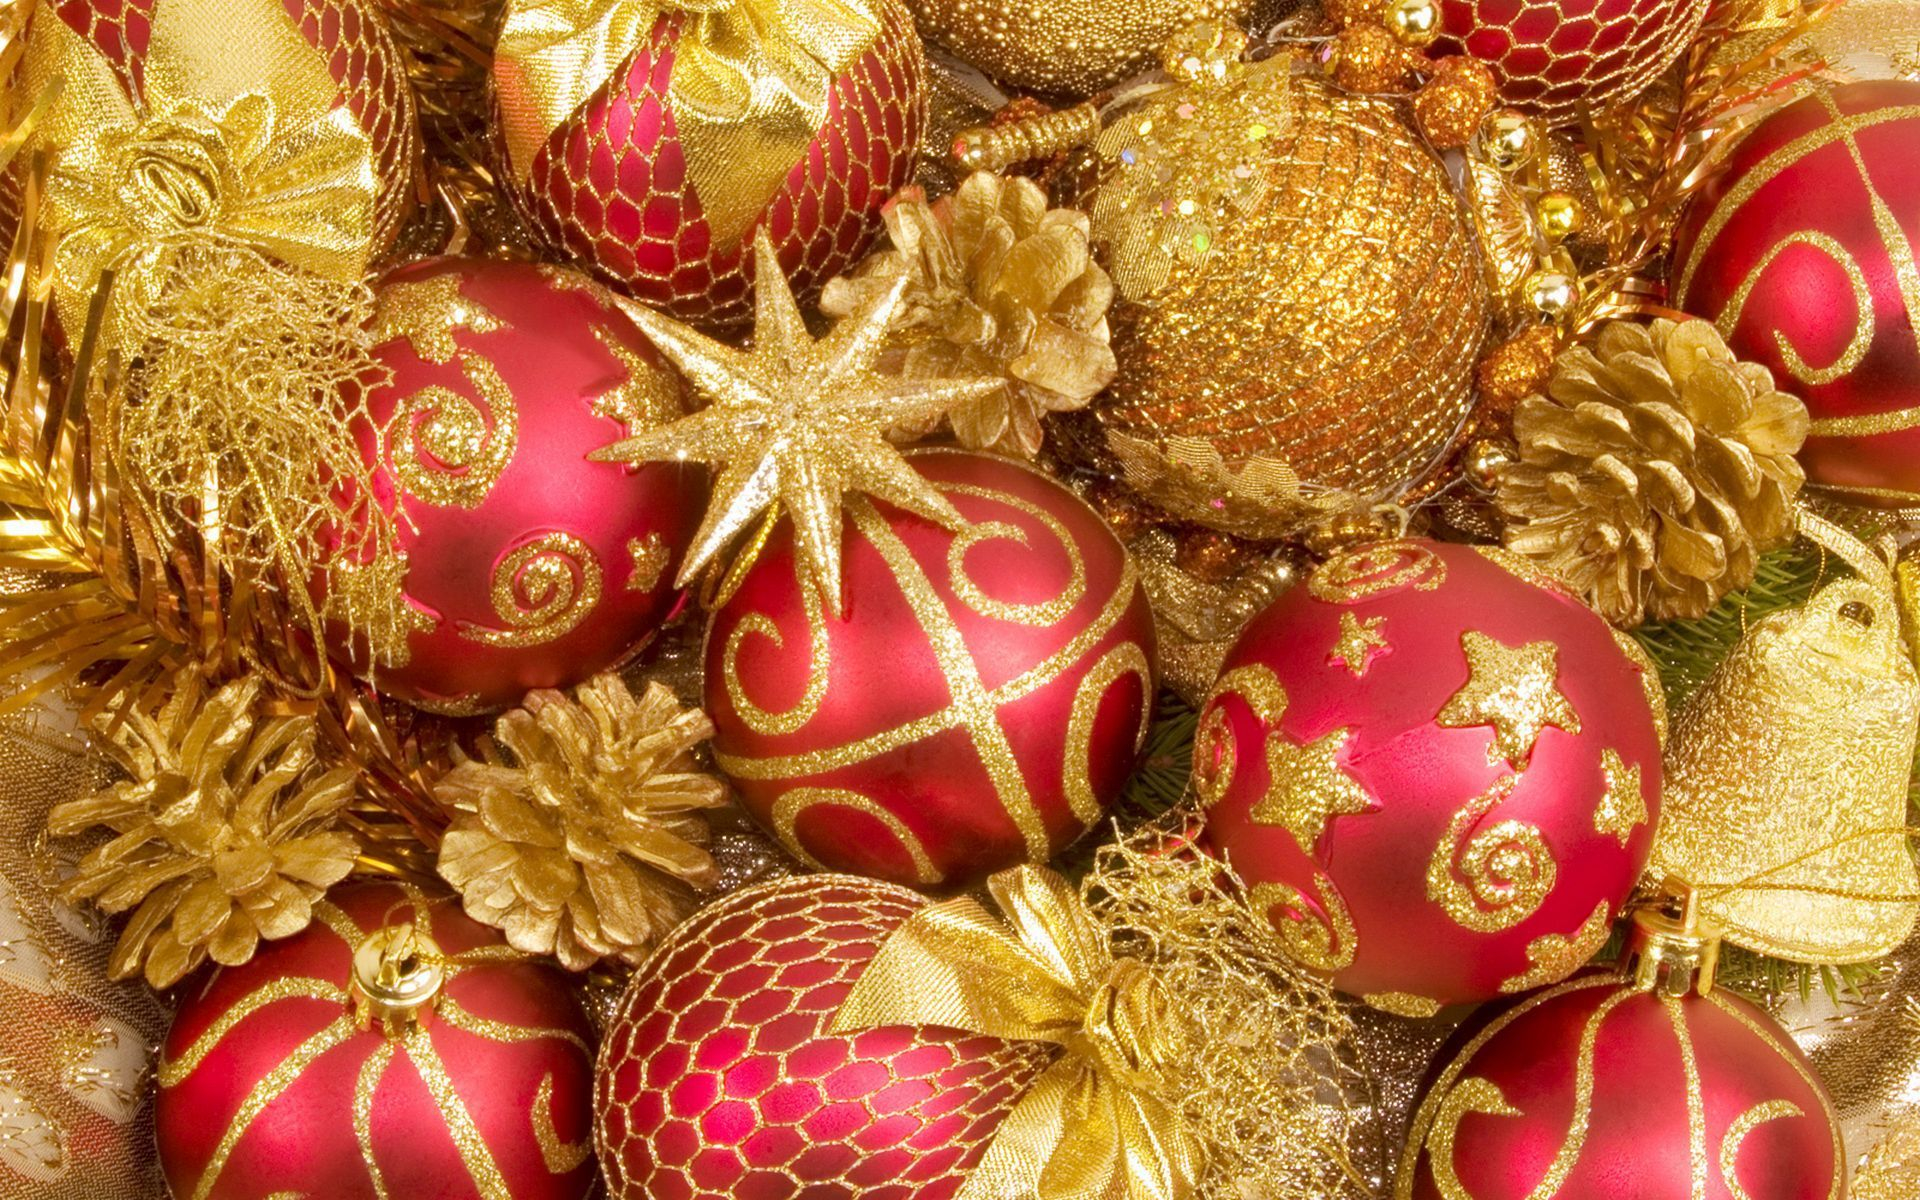 Ornaments and Decorations in Red and Gold Full HD 